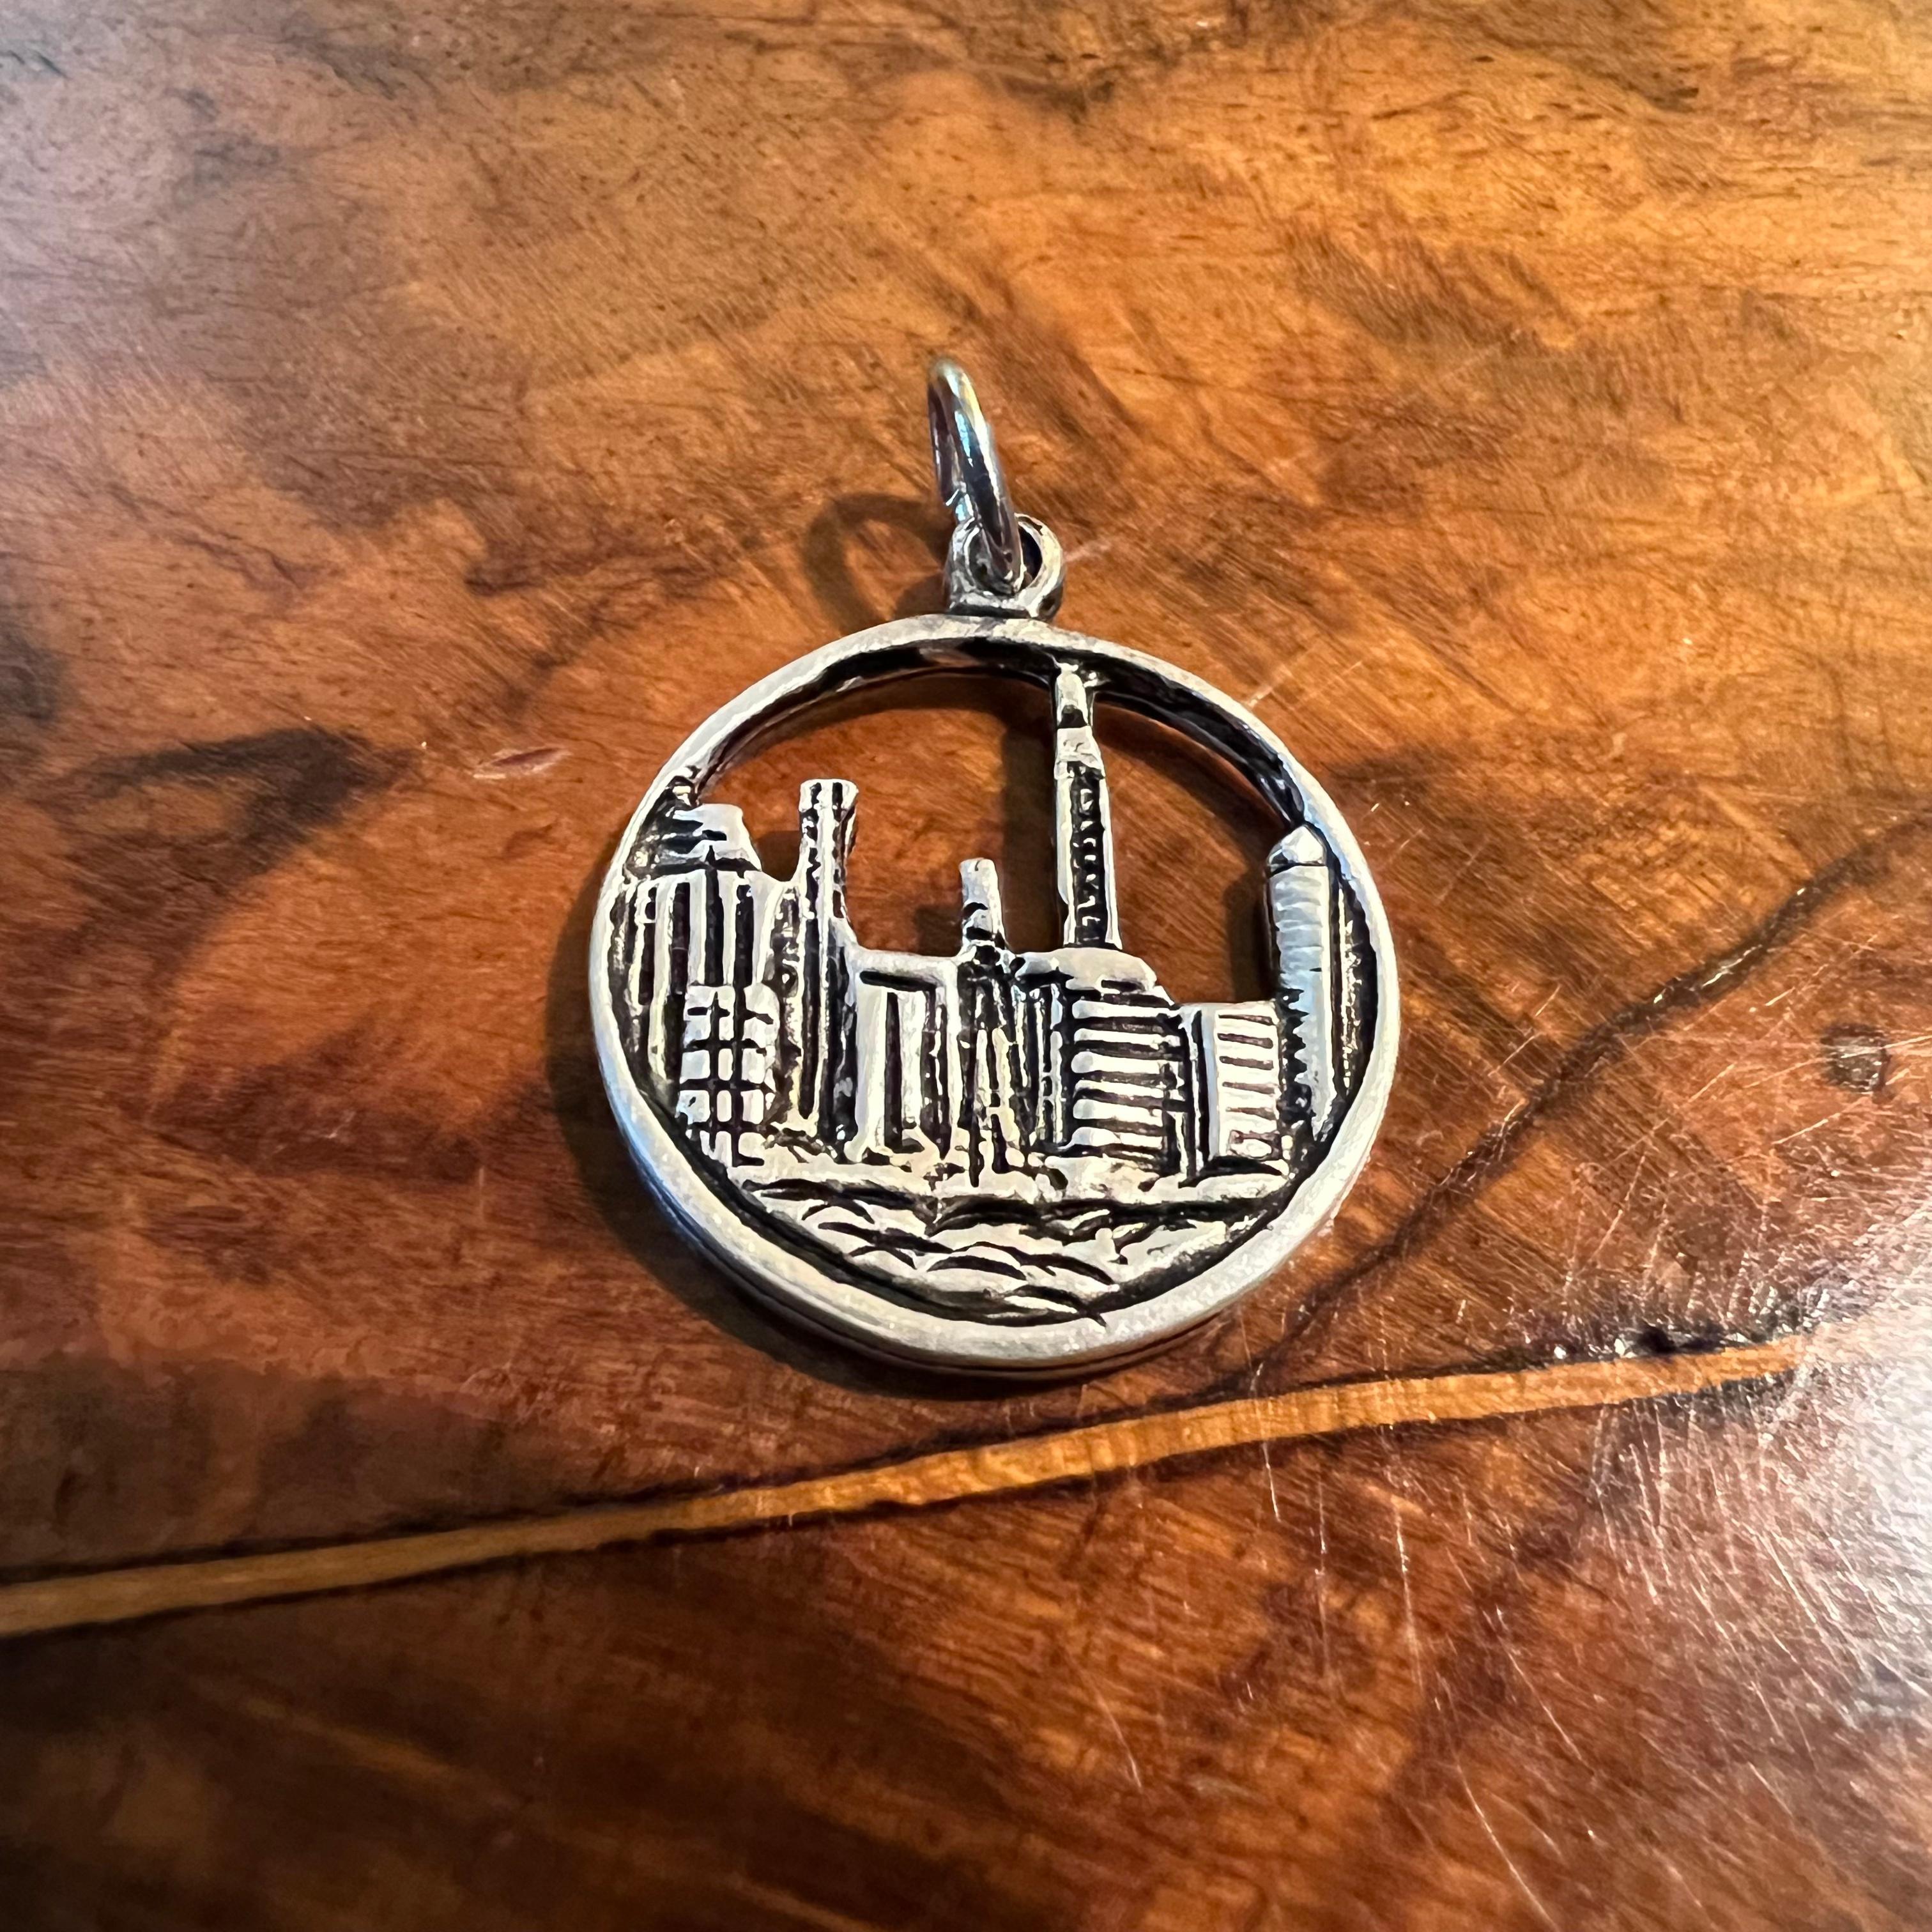 Town design in a circle, jewellery is preowned and is sold in 